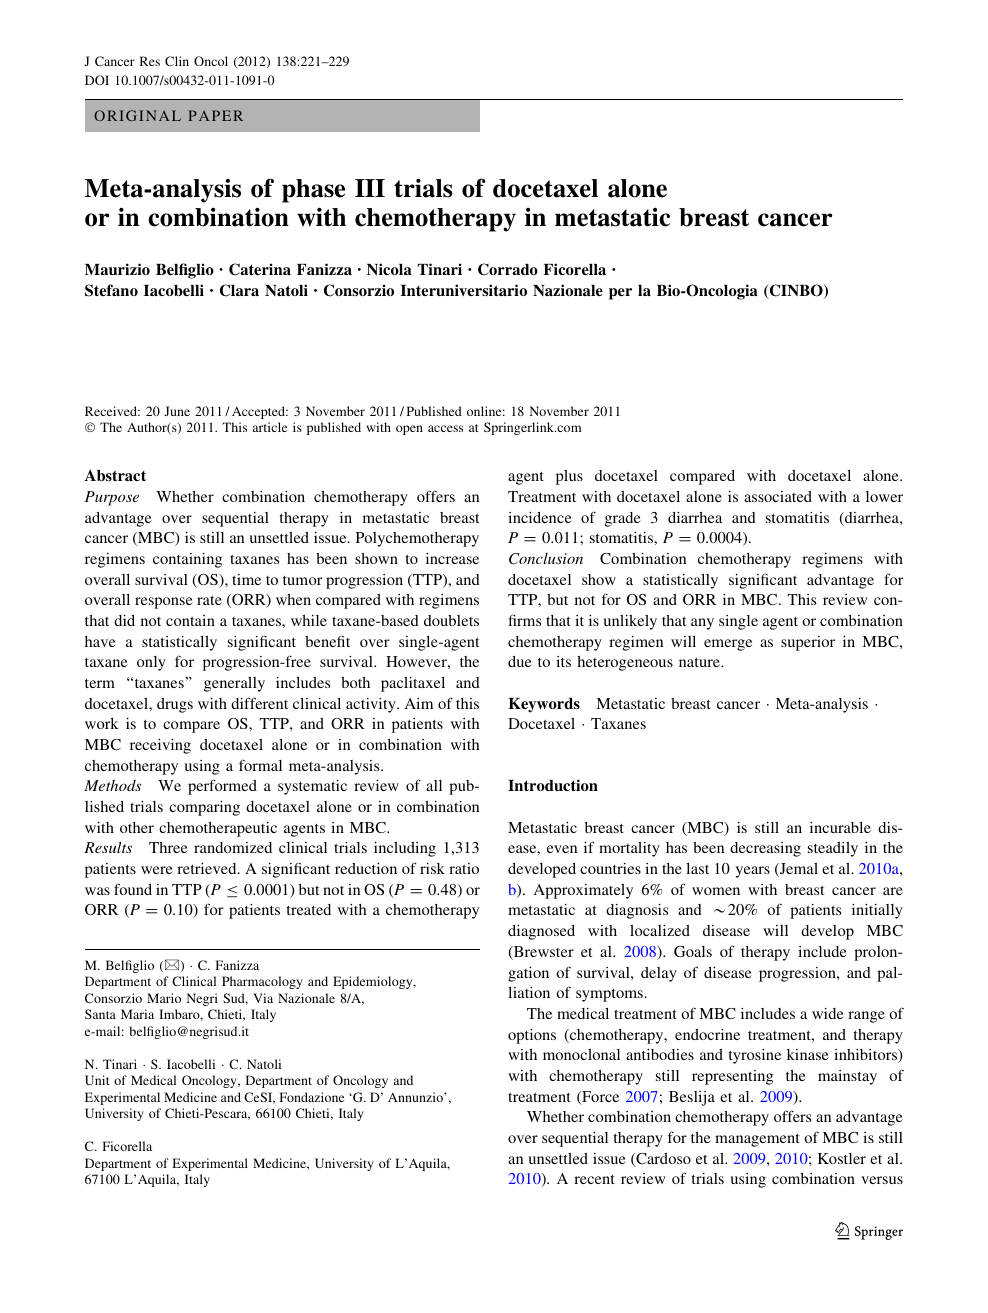 Meta Analysis Of Phase Iii Trials Of Docetaxel Alone Or In Combination With Chemotherapy In Metastatic Breast Cancer Topic Of Research Paper In Clinical Medicine Download Scholarly Article Pdf And Read For